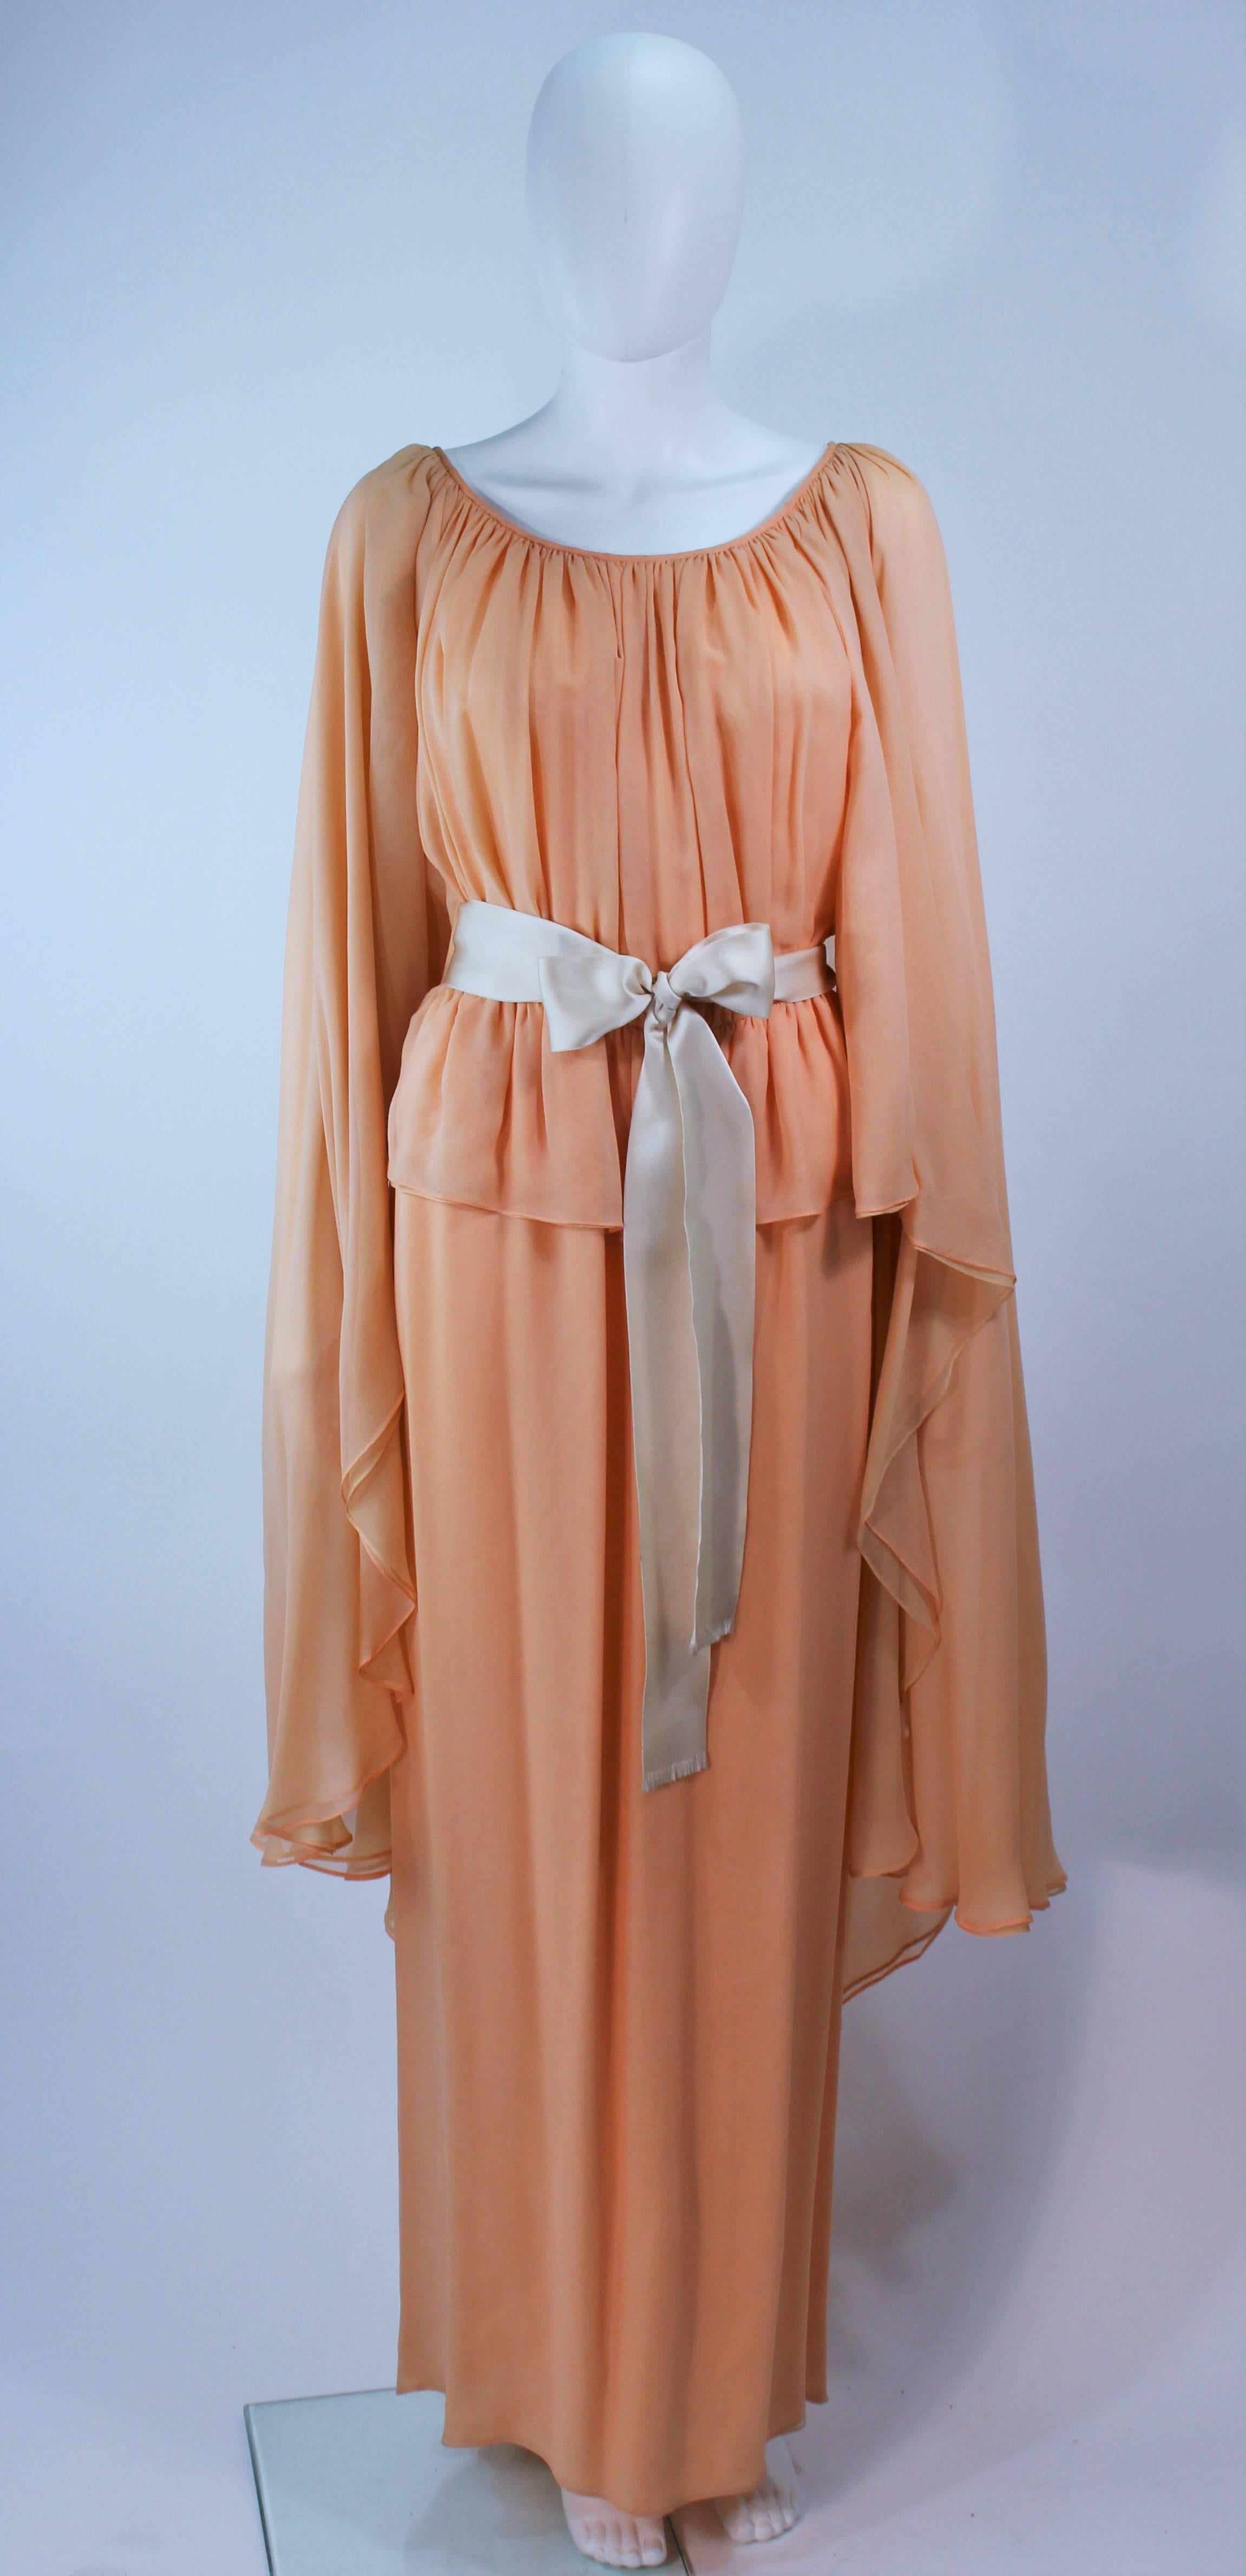 This Bonwit Teller own is composed of a peach and apricot hue silk with a draped design, and satin belt. There is a center back closure. In excellent condition, some slight color discoloration.

  **Please cross-reference measurements for personal